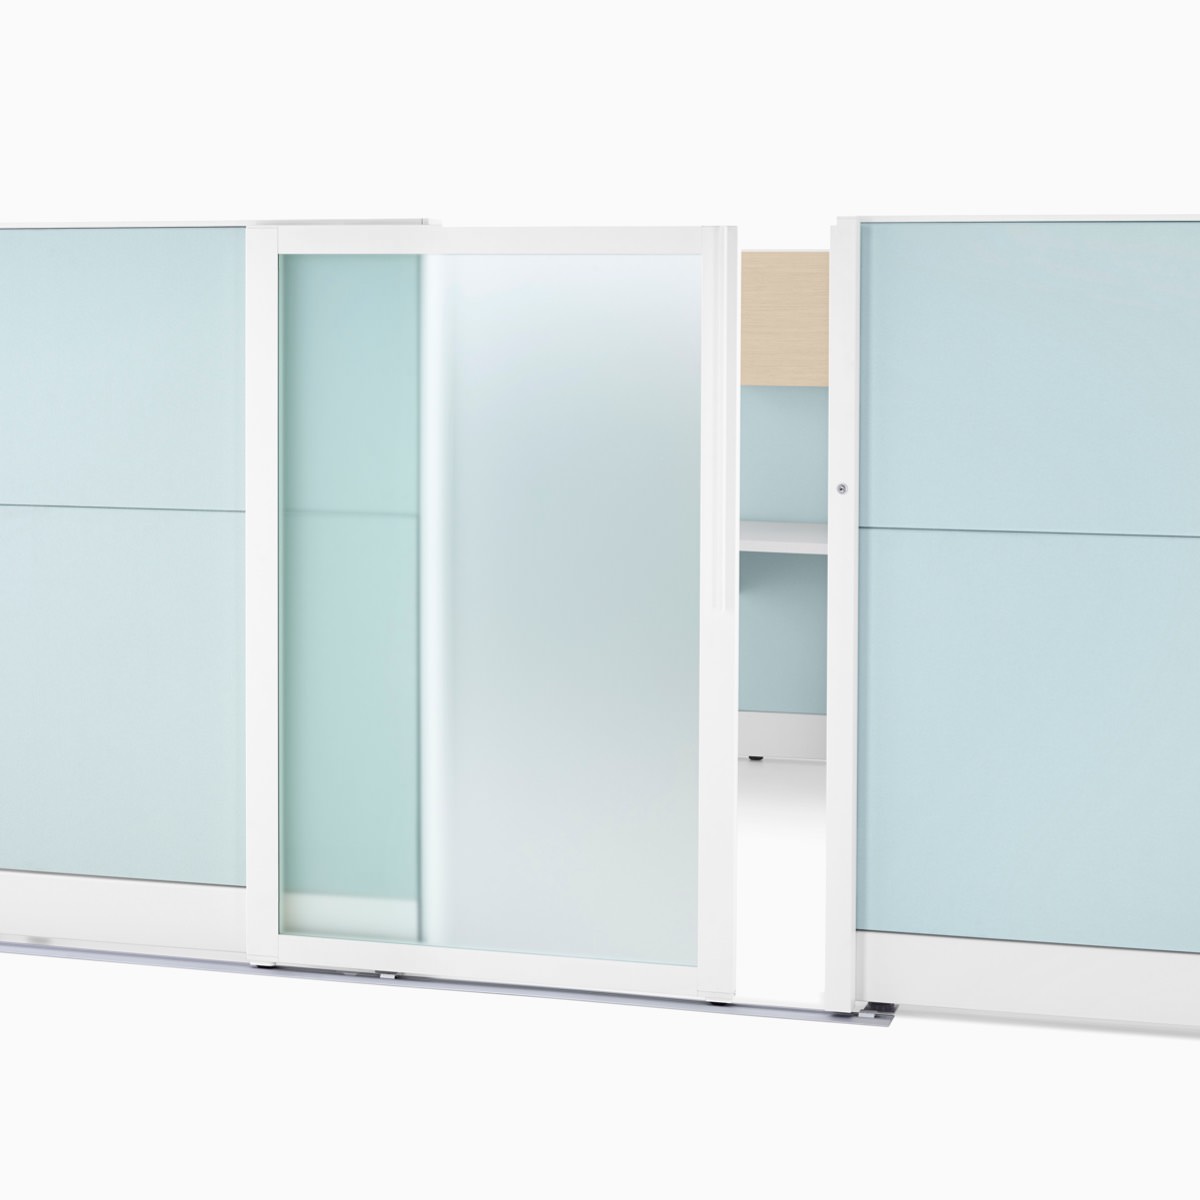 An Ethospace wall system in a light aqua finish with a translucent sliding privacy door.